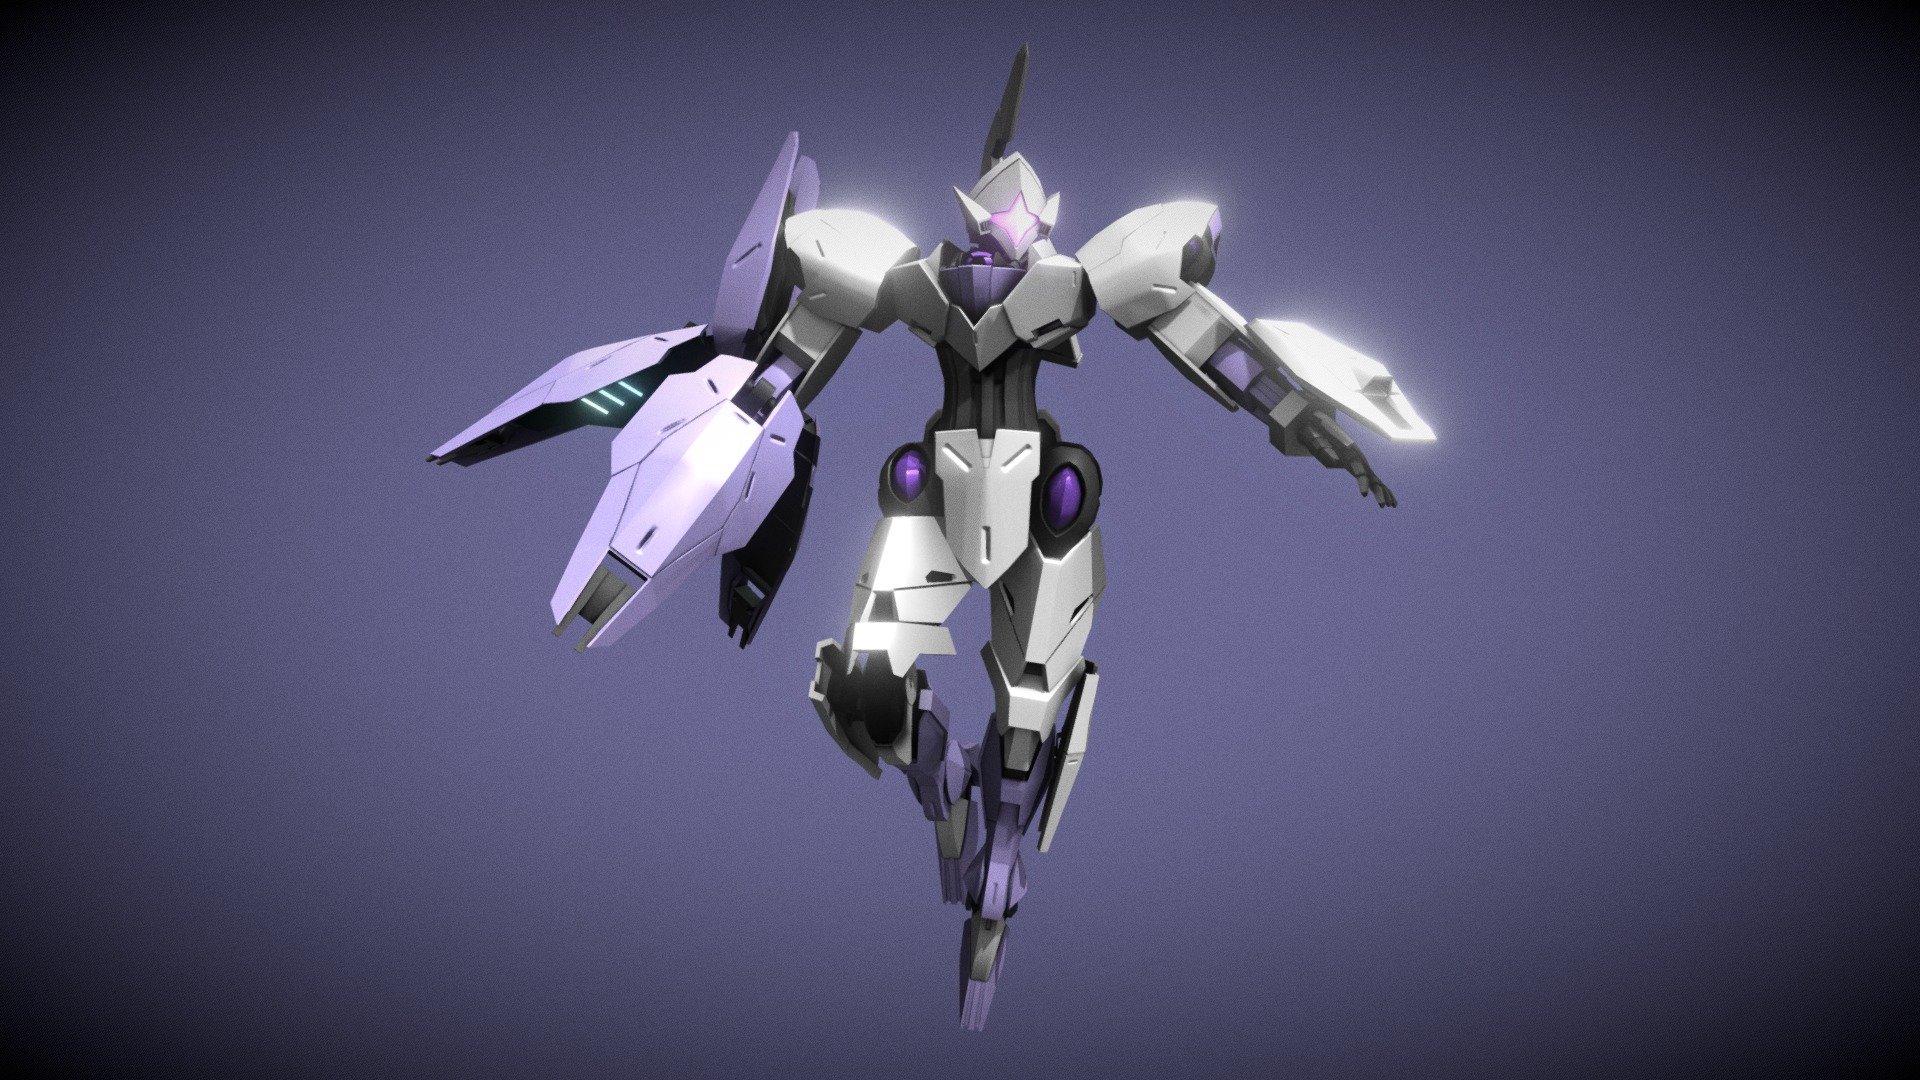 The Michaelis is Grassley Defense Systems' new cutting edge mobile suit piloted by Shaddiq Zenelli. It is fitted with the latest Anti-GUND Format or Antidote system seen on its predecessor the Beguir Beu. Additionally, it is equipped with a detachable Beam Bracer utilizing Kinetic Effectors, when folded up it can also act as a Beam Rifle. 

The model was made in Maya and textured in Substance Painter it is also rigged and optimized for real time rendering 3d model